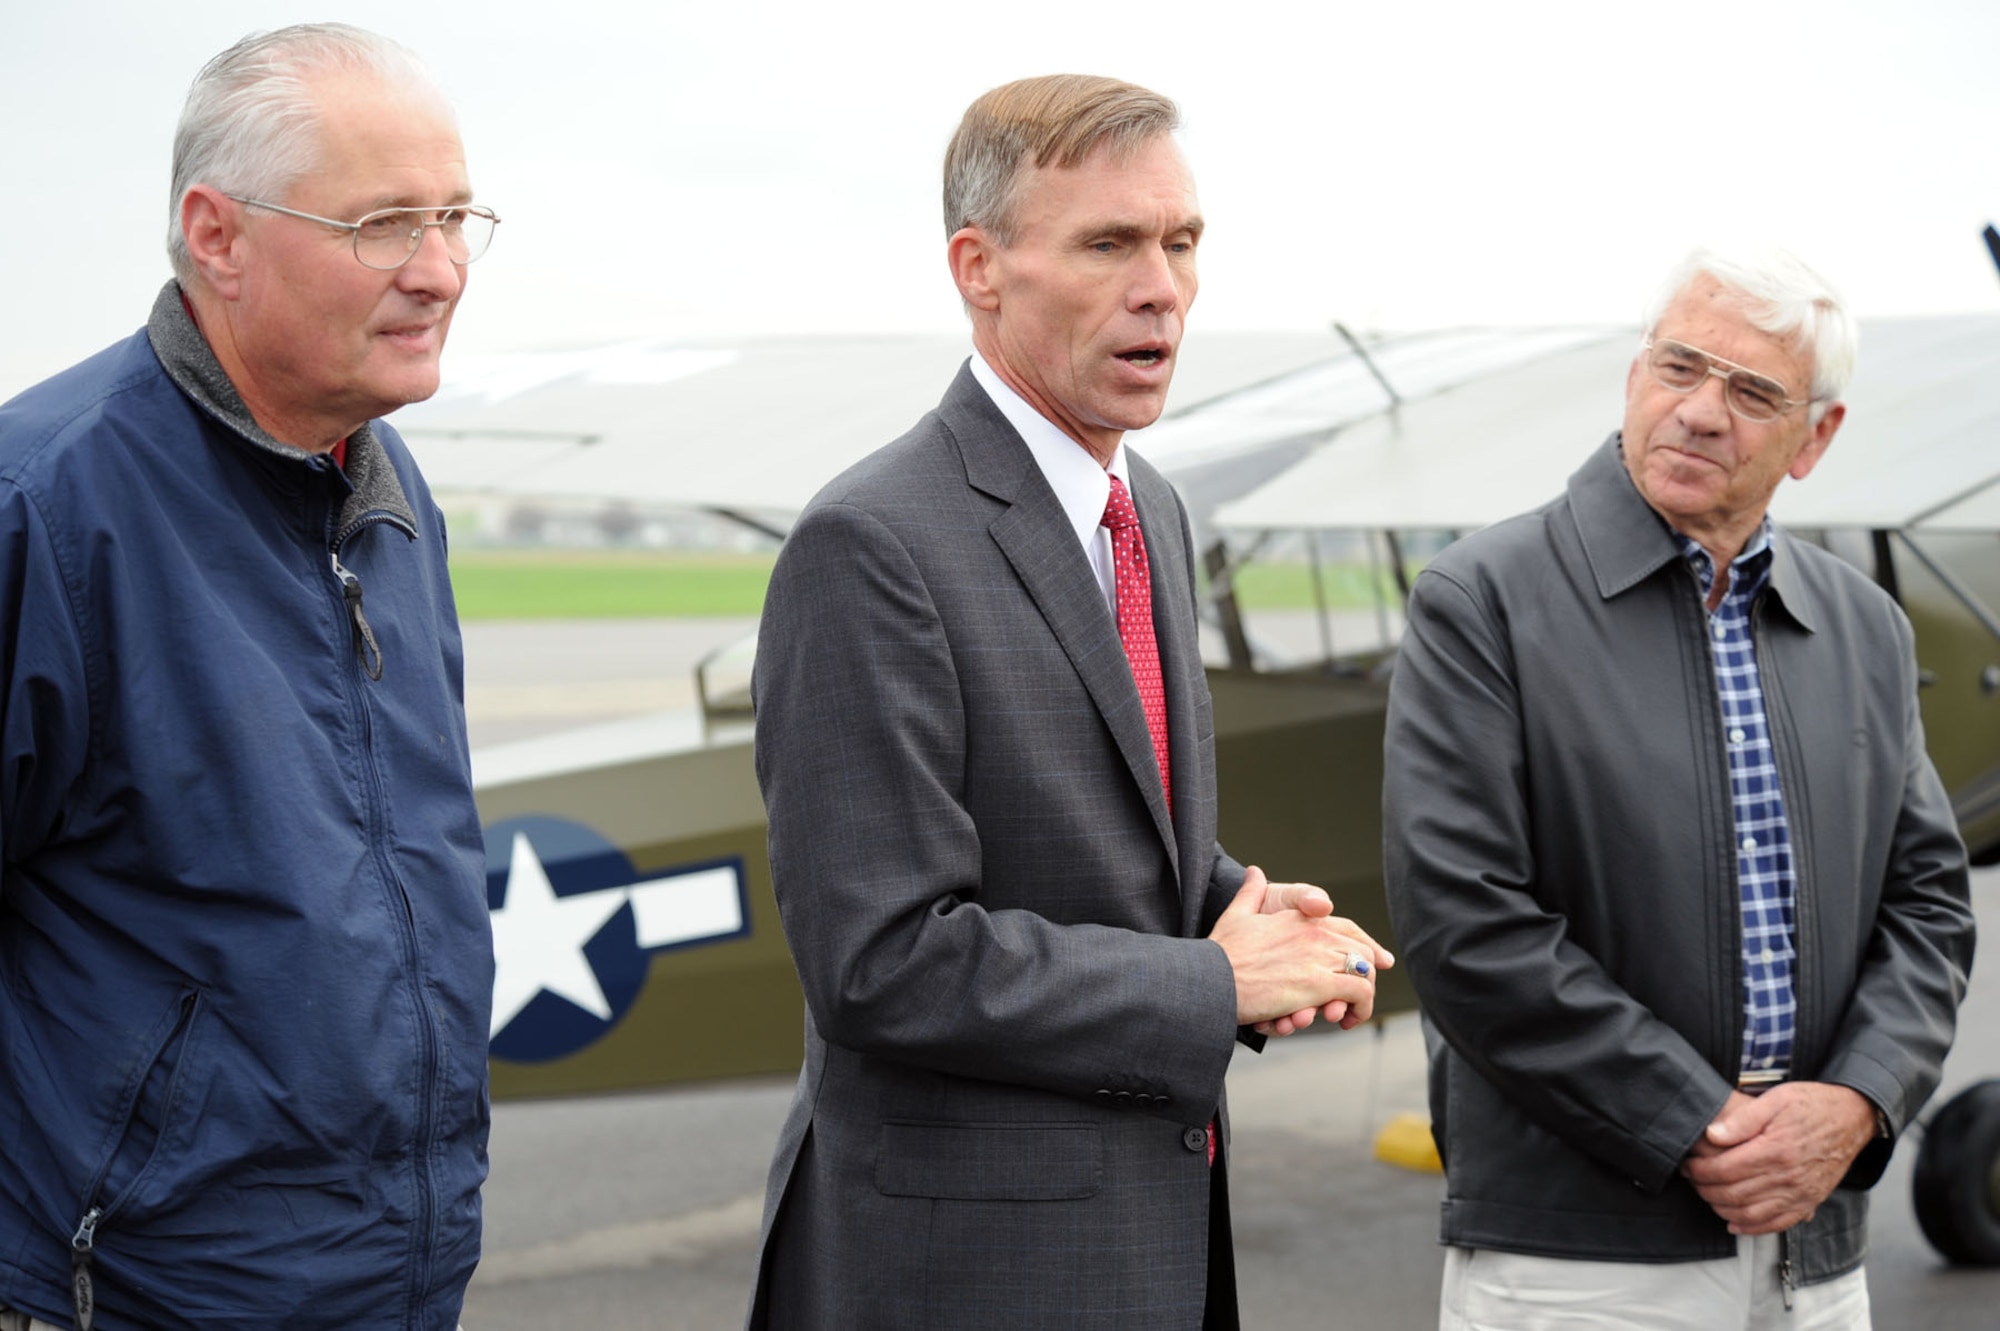 DAYTON, Ohio -- Lt. Gen. (Ret.) John L. "Jack" Hudson (center), director of the National Museum of the U.S. Air Force, addresses the audience after the L-2M made its final flight on Sept. 28, 2011. This L-2M was used at the U.S. Army Air Forces Liaison Pilot Training School during World War II. Also pictured are Dick Valladao (right), the aircraft donor and pilot, and Roger Deere, chief of the museum's Restoration Division. (U.S. Air Force photo by Jeff Fisher)